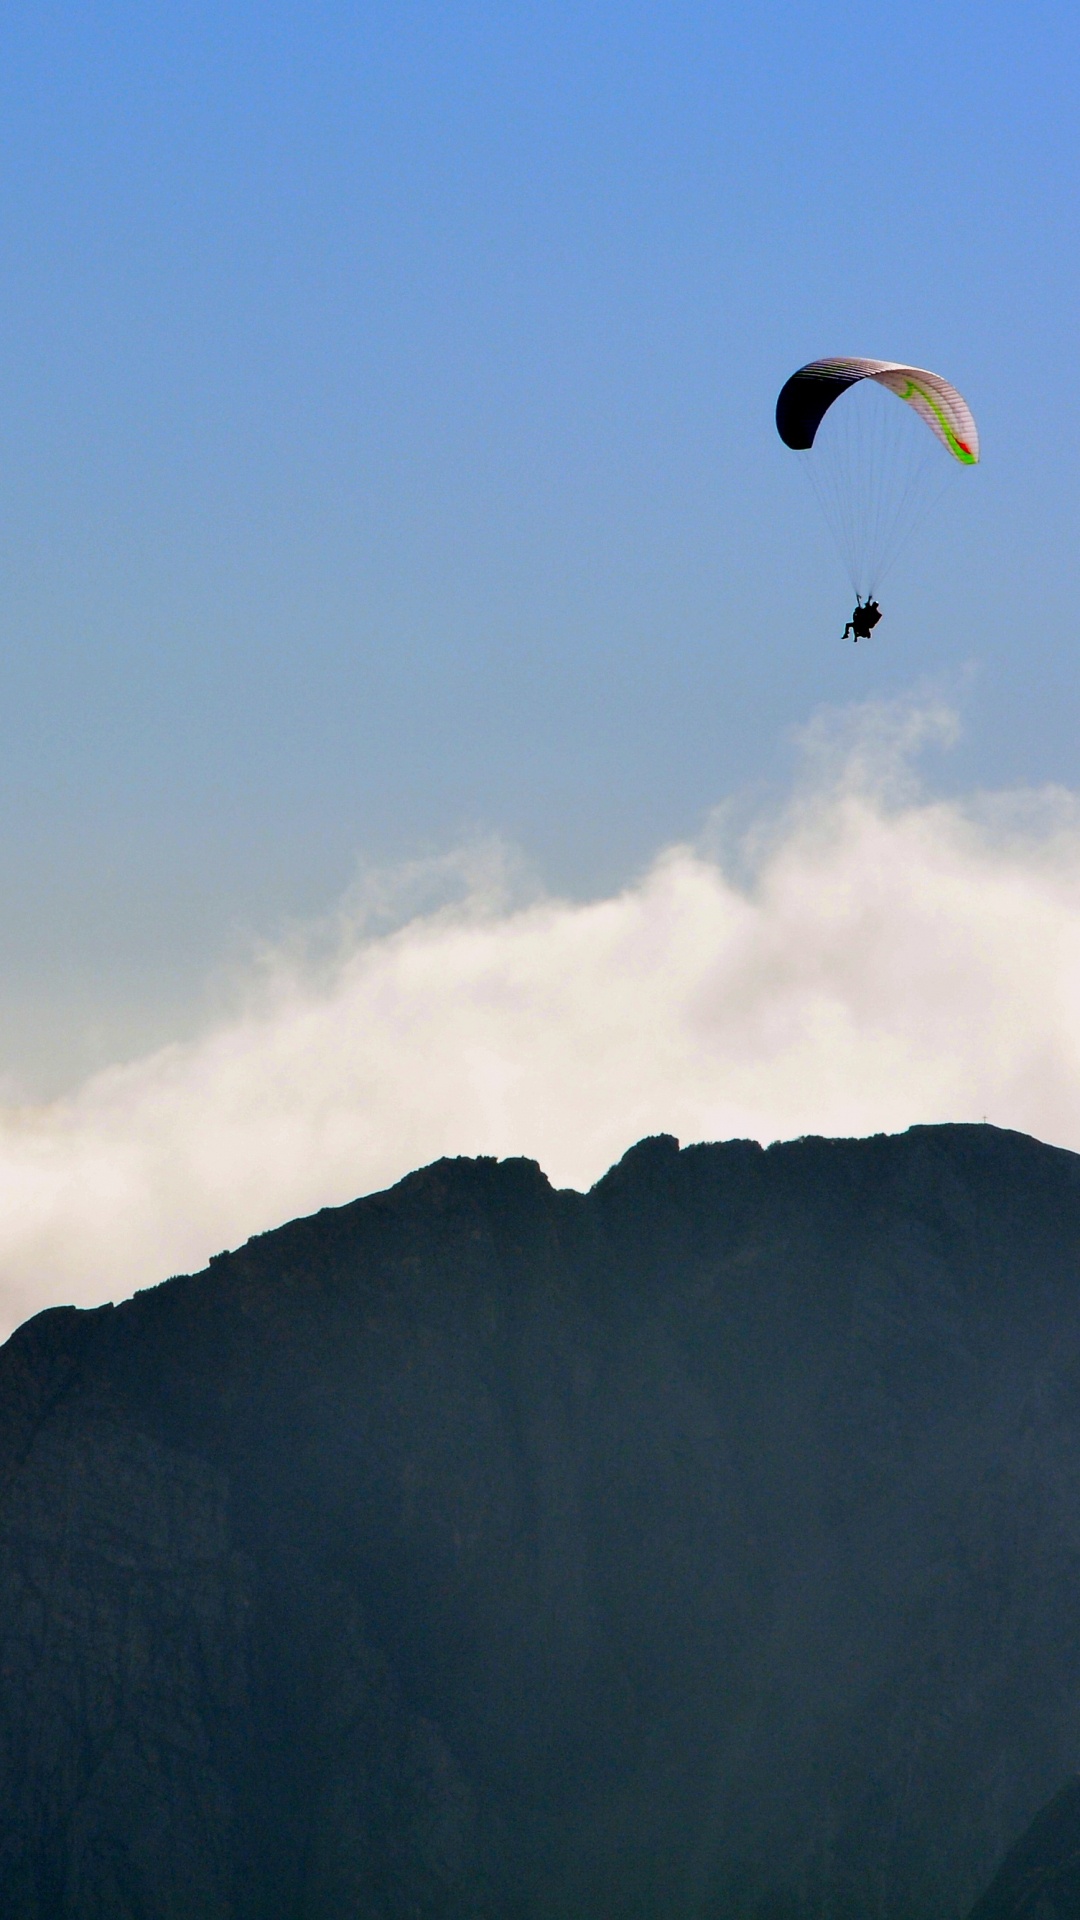 Person Riding Parachute Over Mountain. Wallpaper in 1080x1920 Resolution